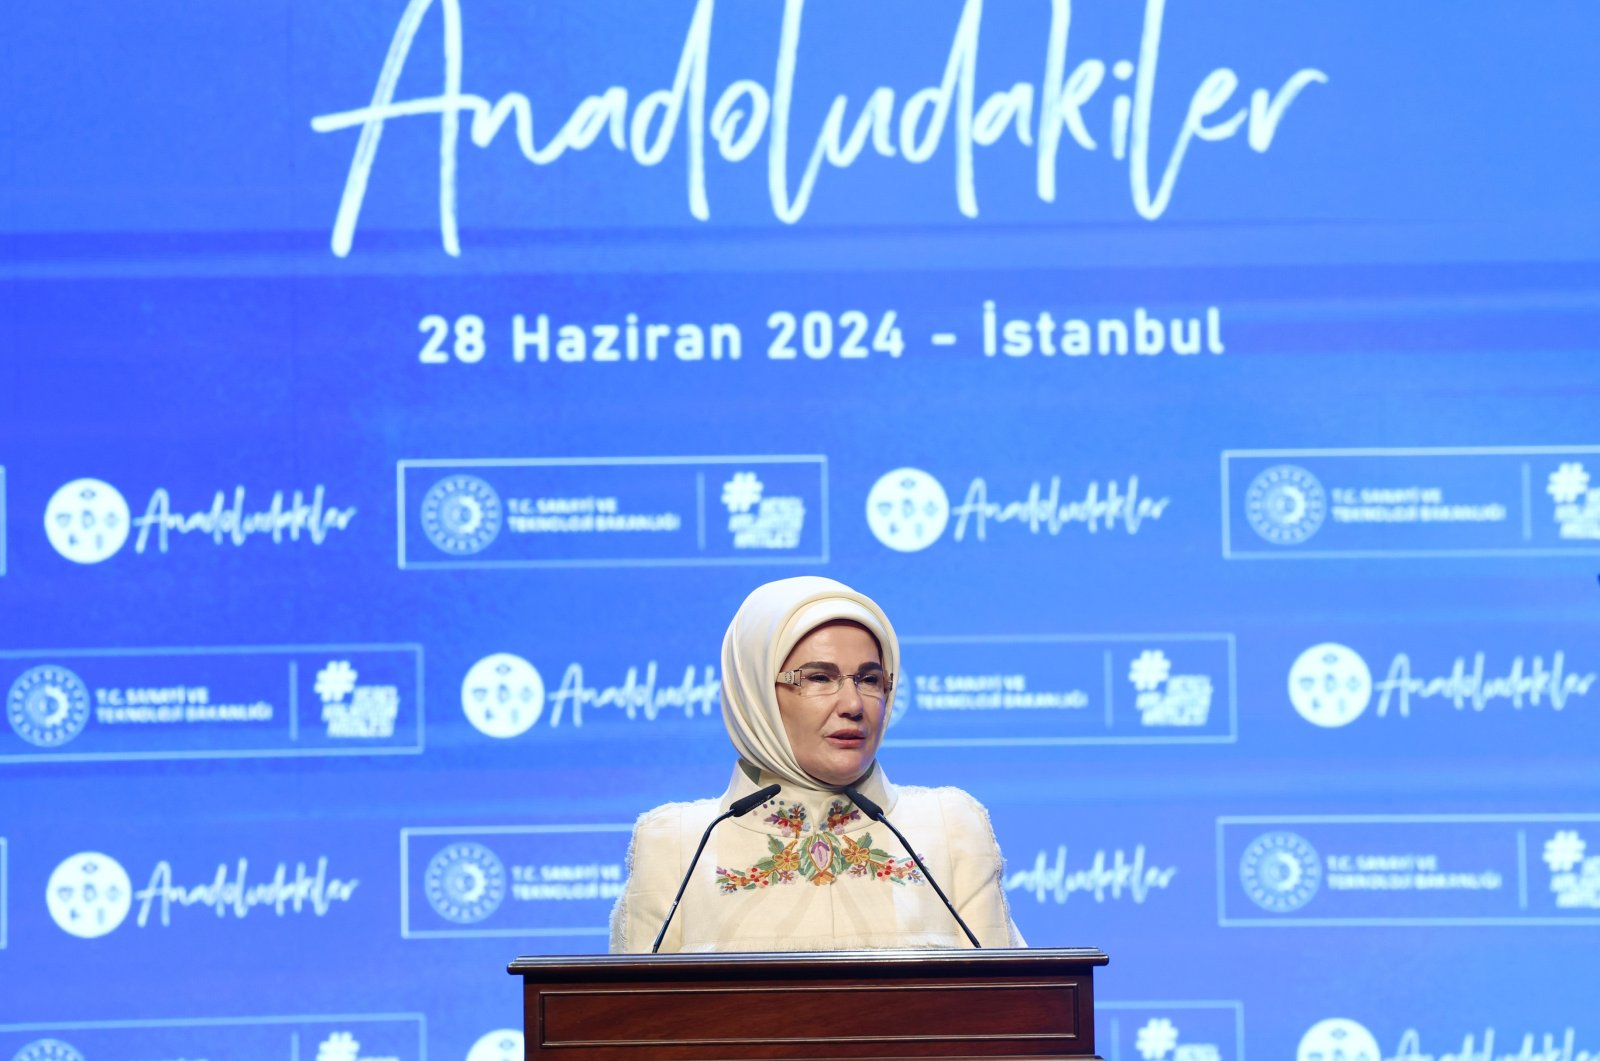 First Lady Emine Erdoğan speaks at the inauguration ceremony of the (Anadoludakiler) “Anatolia&#039;s Heritage” project at Atatürk Cultural Center in Istanbul, Friday, June 28, 2024. (IHA Photo)